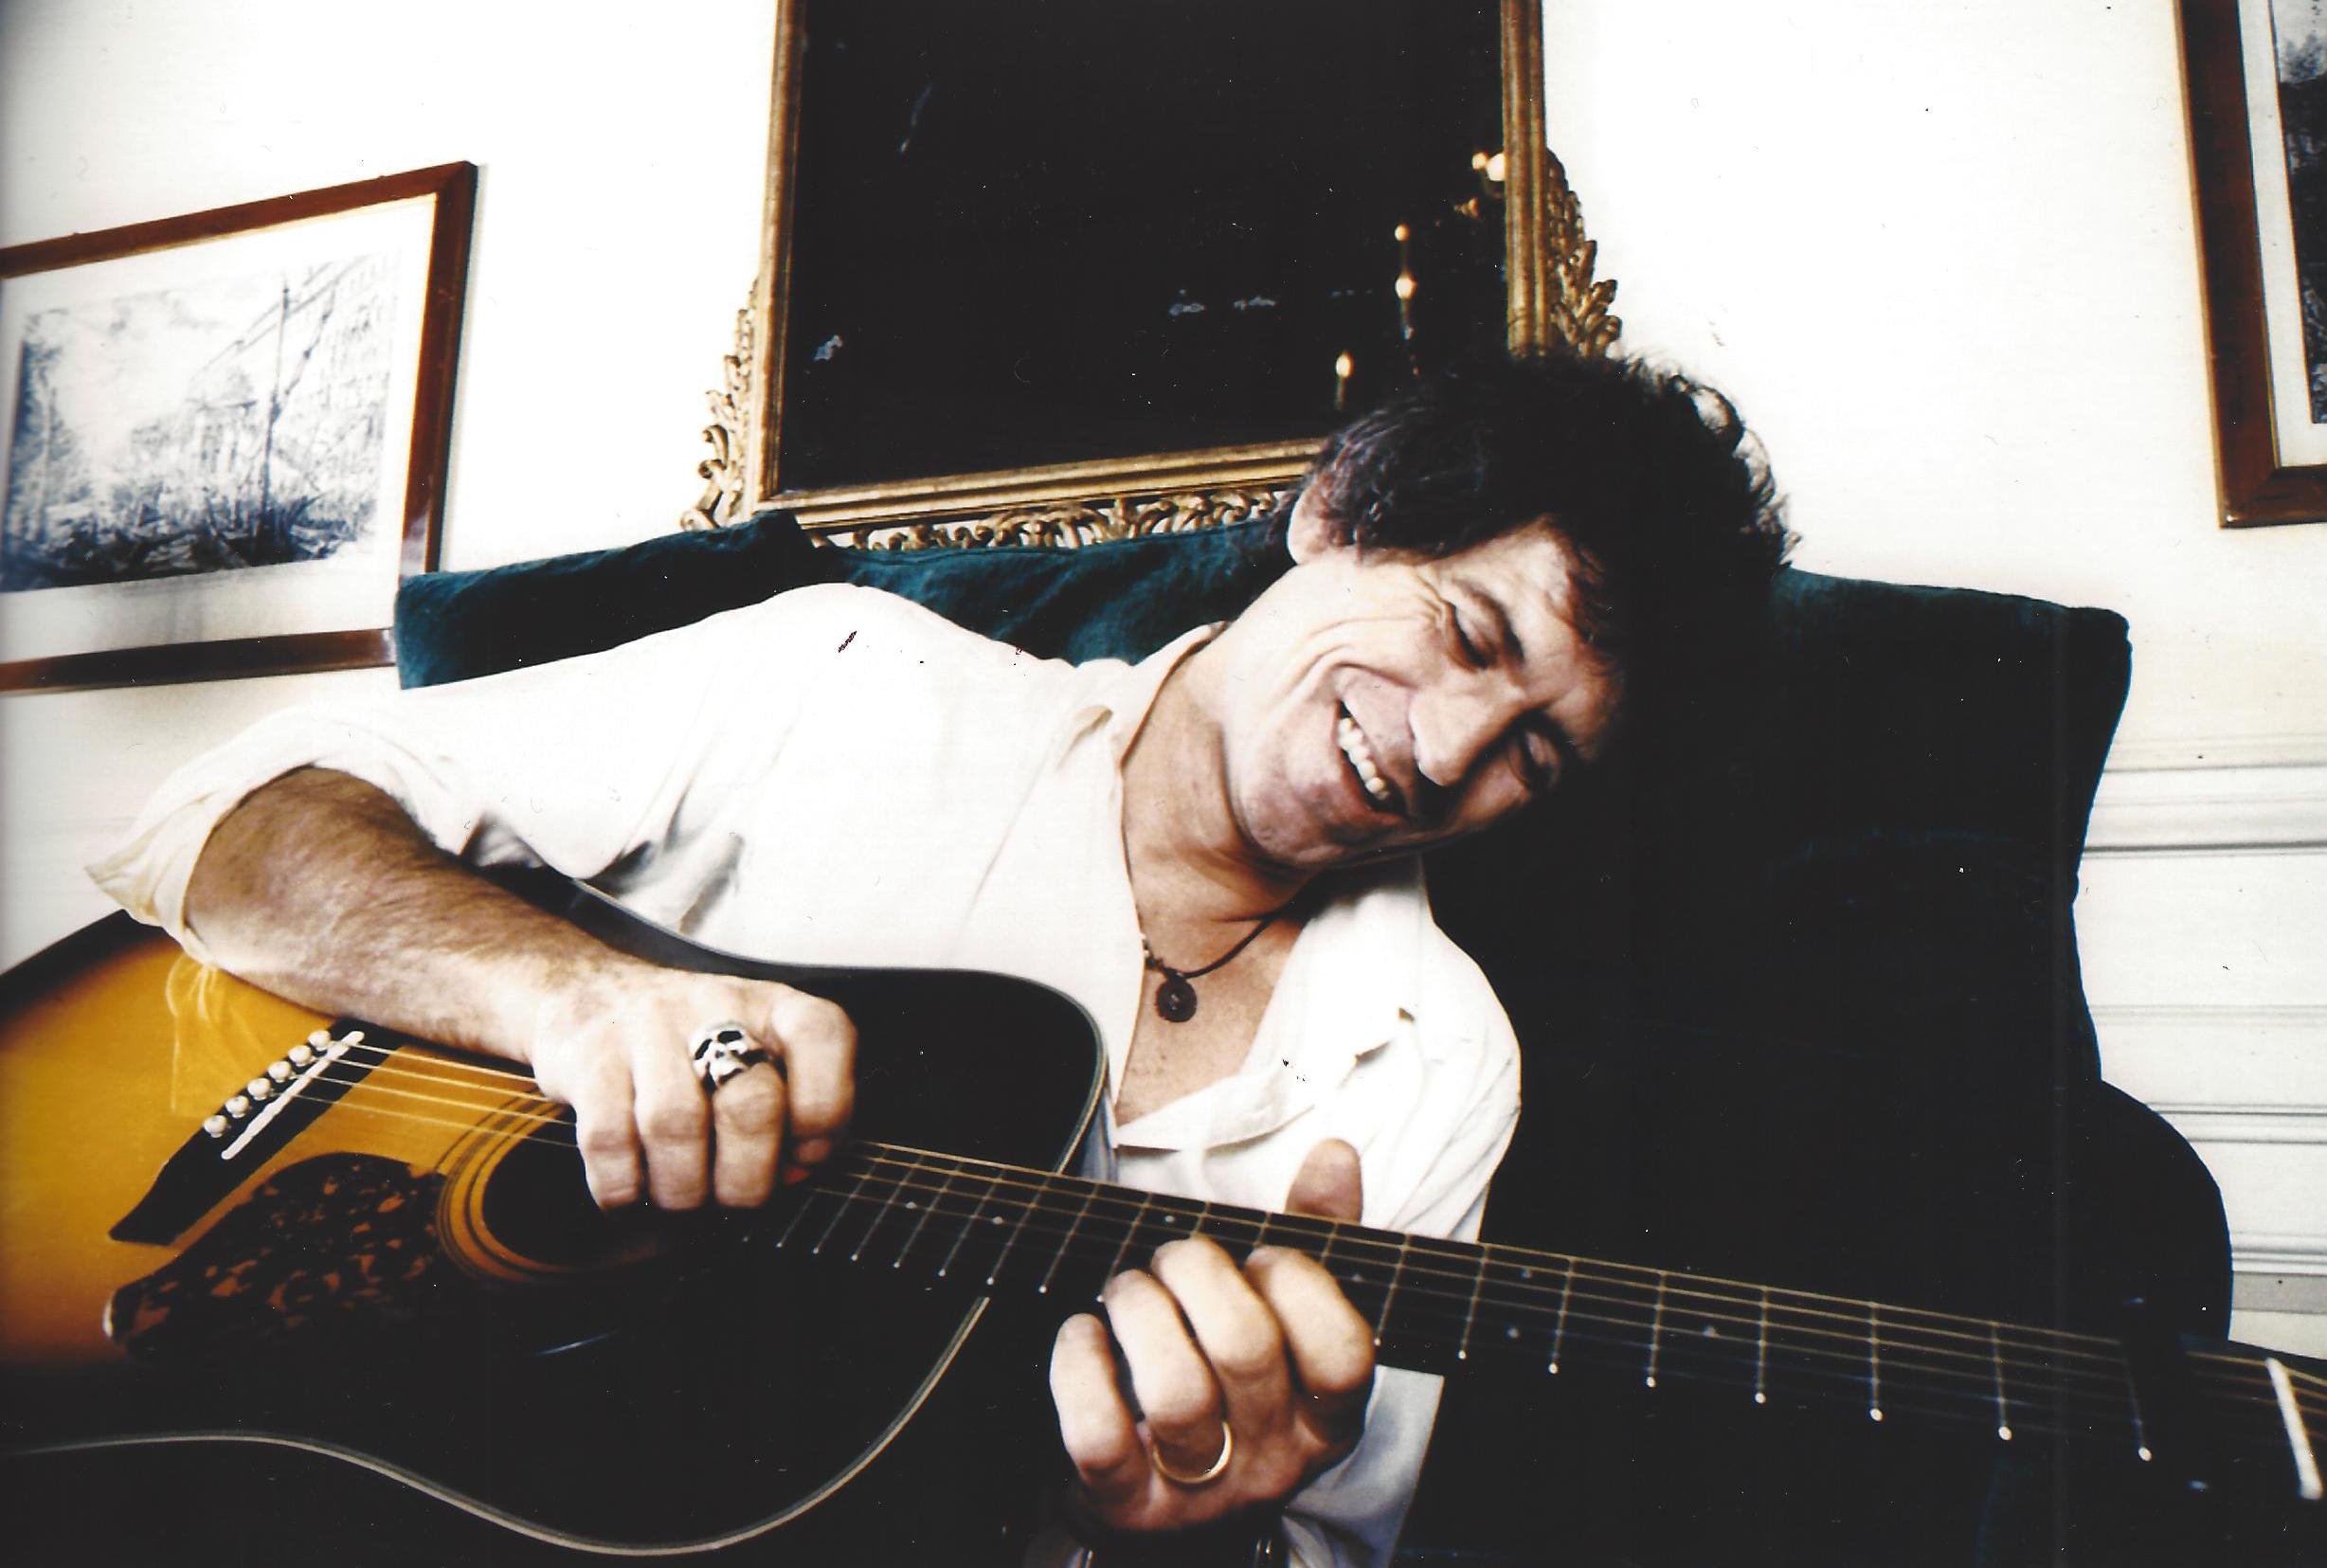 Luciano Viti Portrait Photograph - Keith Richards Smiling with Guitar Vintage Original Photograph